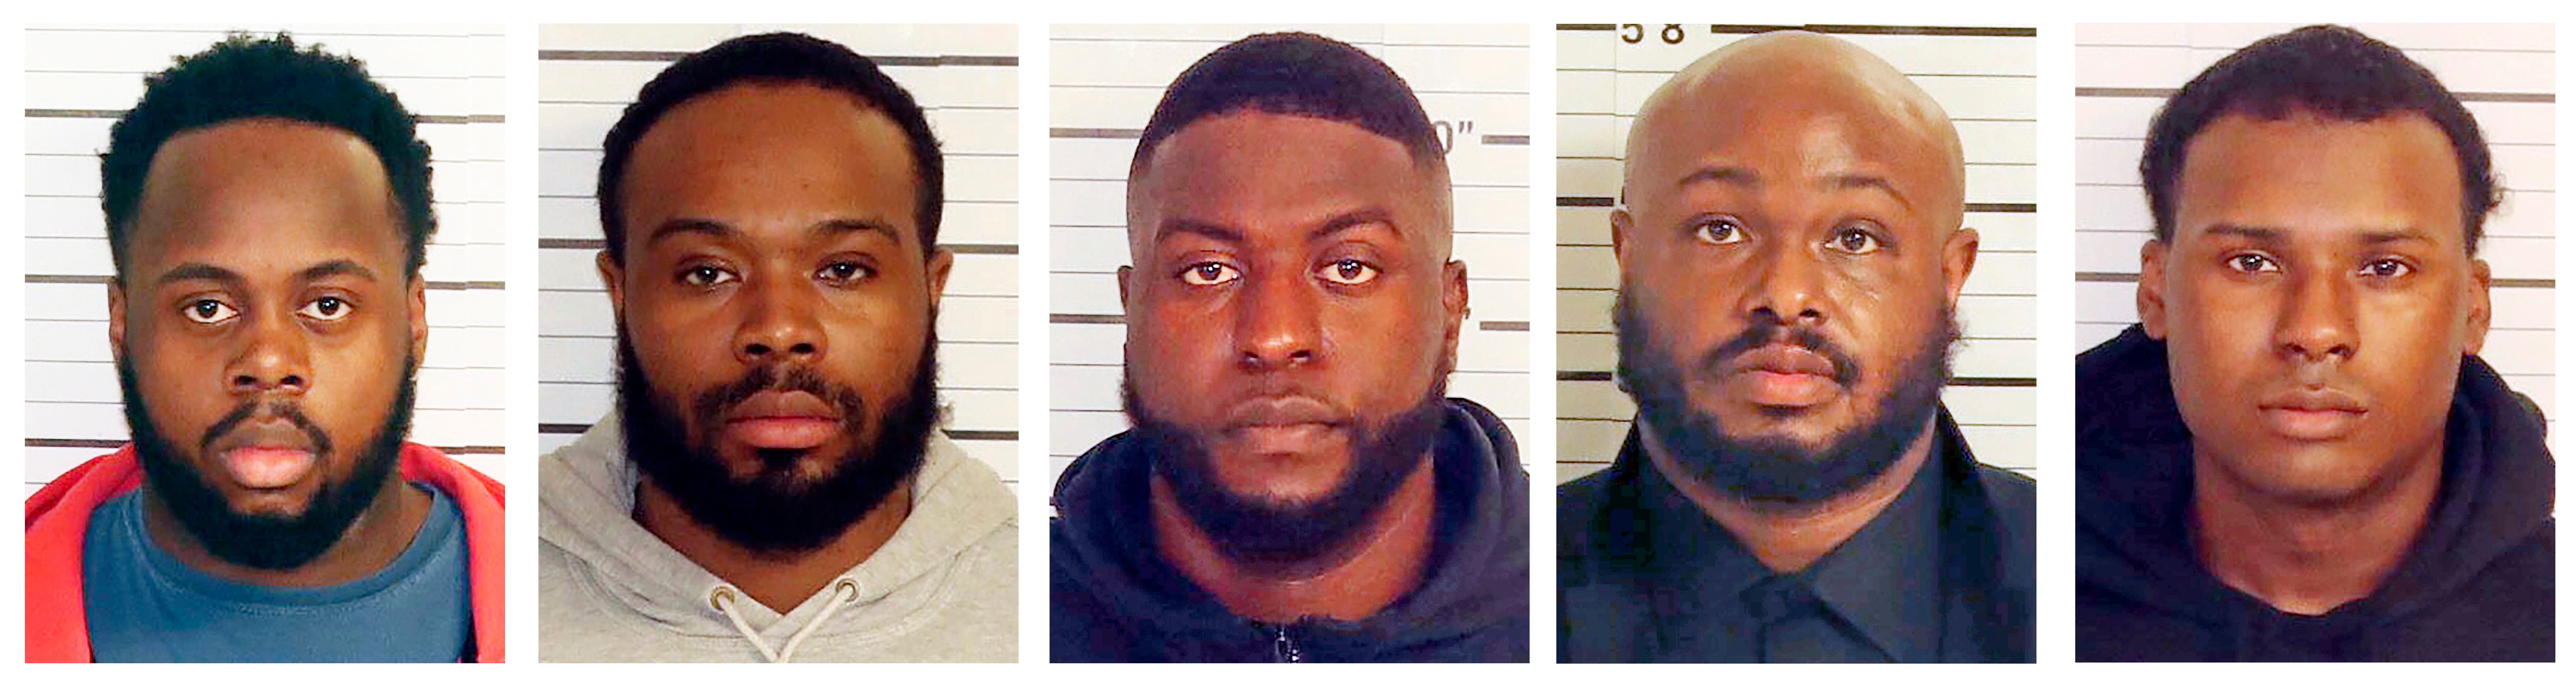 4 former Memphis officers indicted in Tyre Nichols death had previous reprimands, suspensions